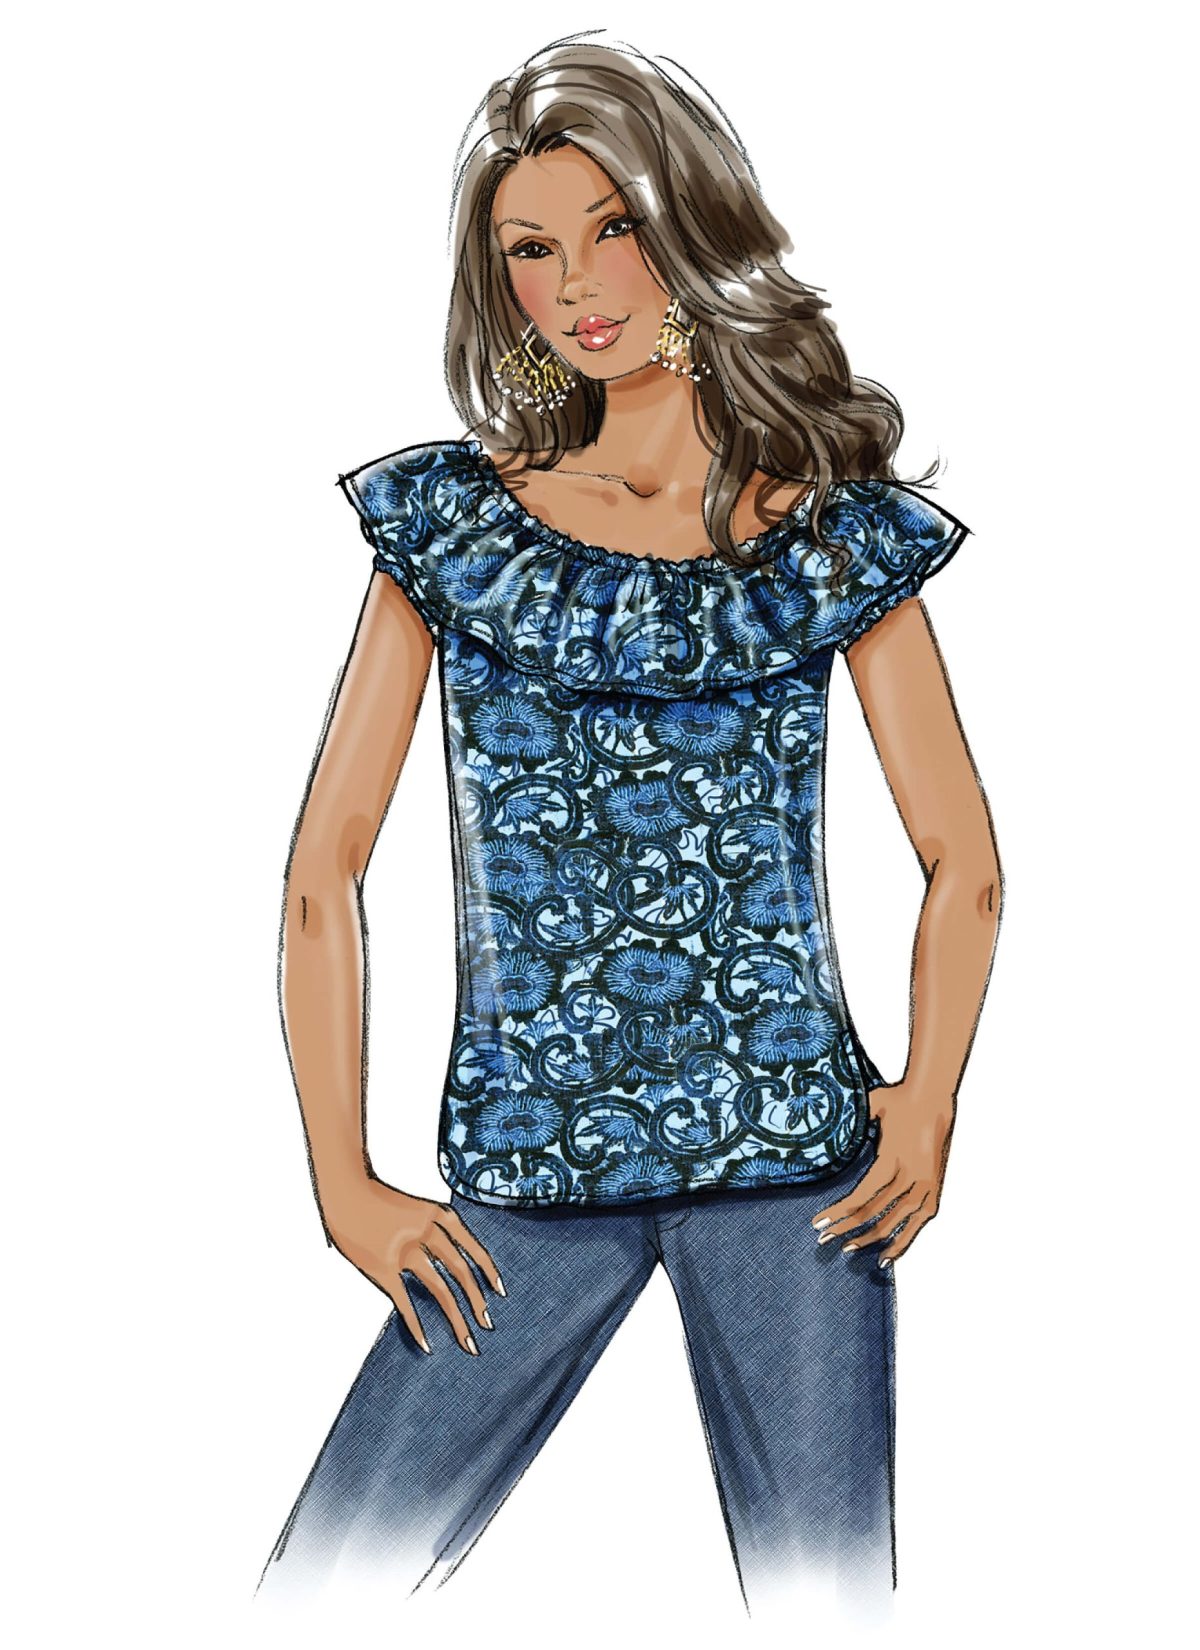 Butterick Sewing Pattern B4685 Misses' Top